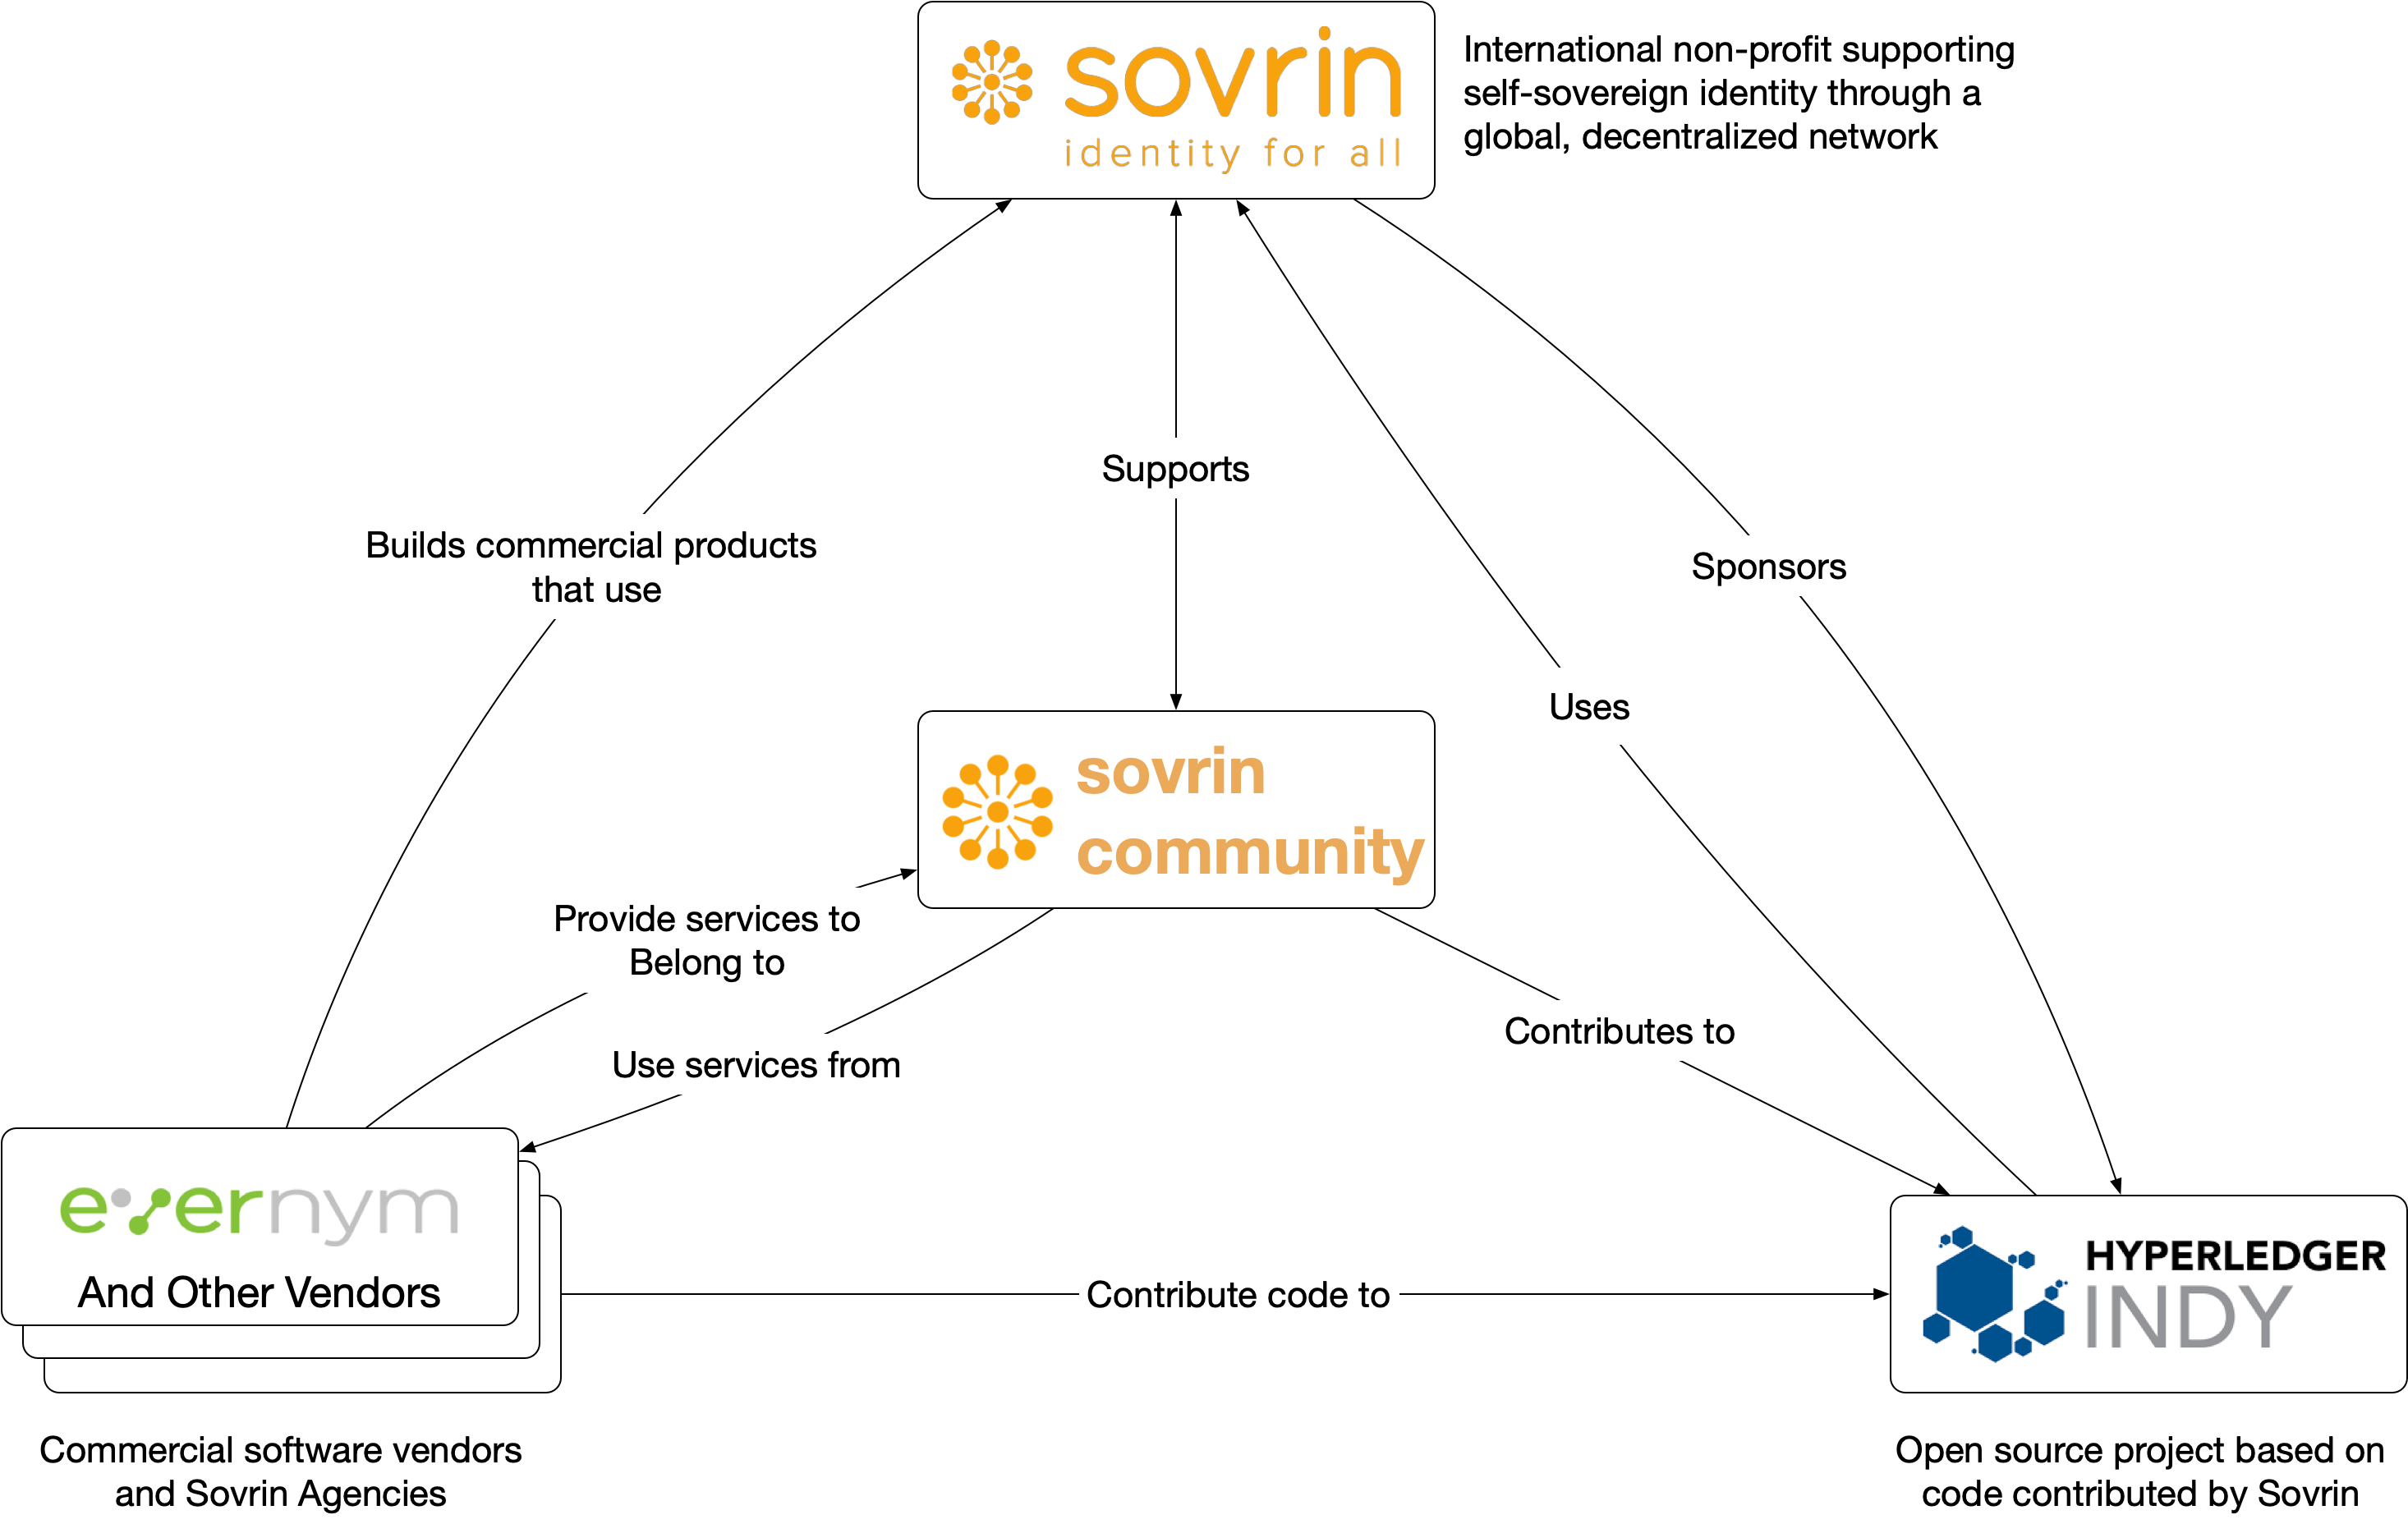 Relationship between Sovrin Foundation, Evernym, and Hyperledger